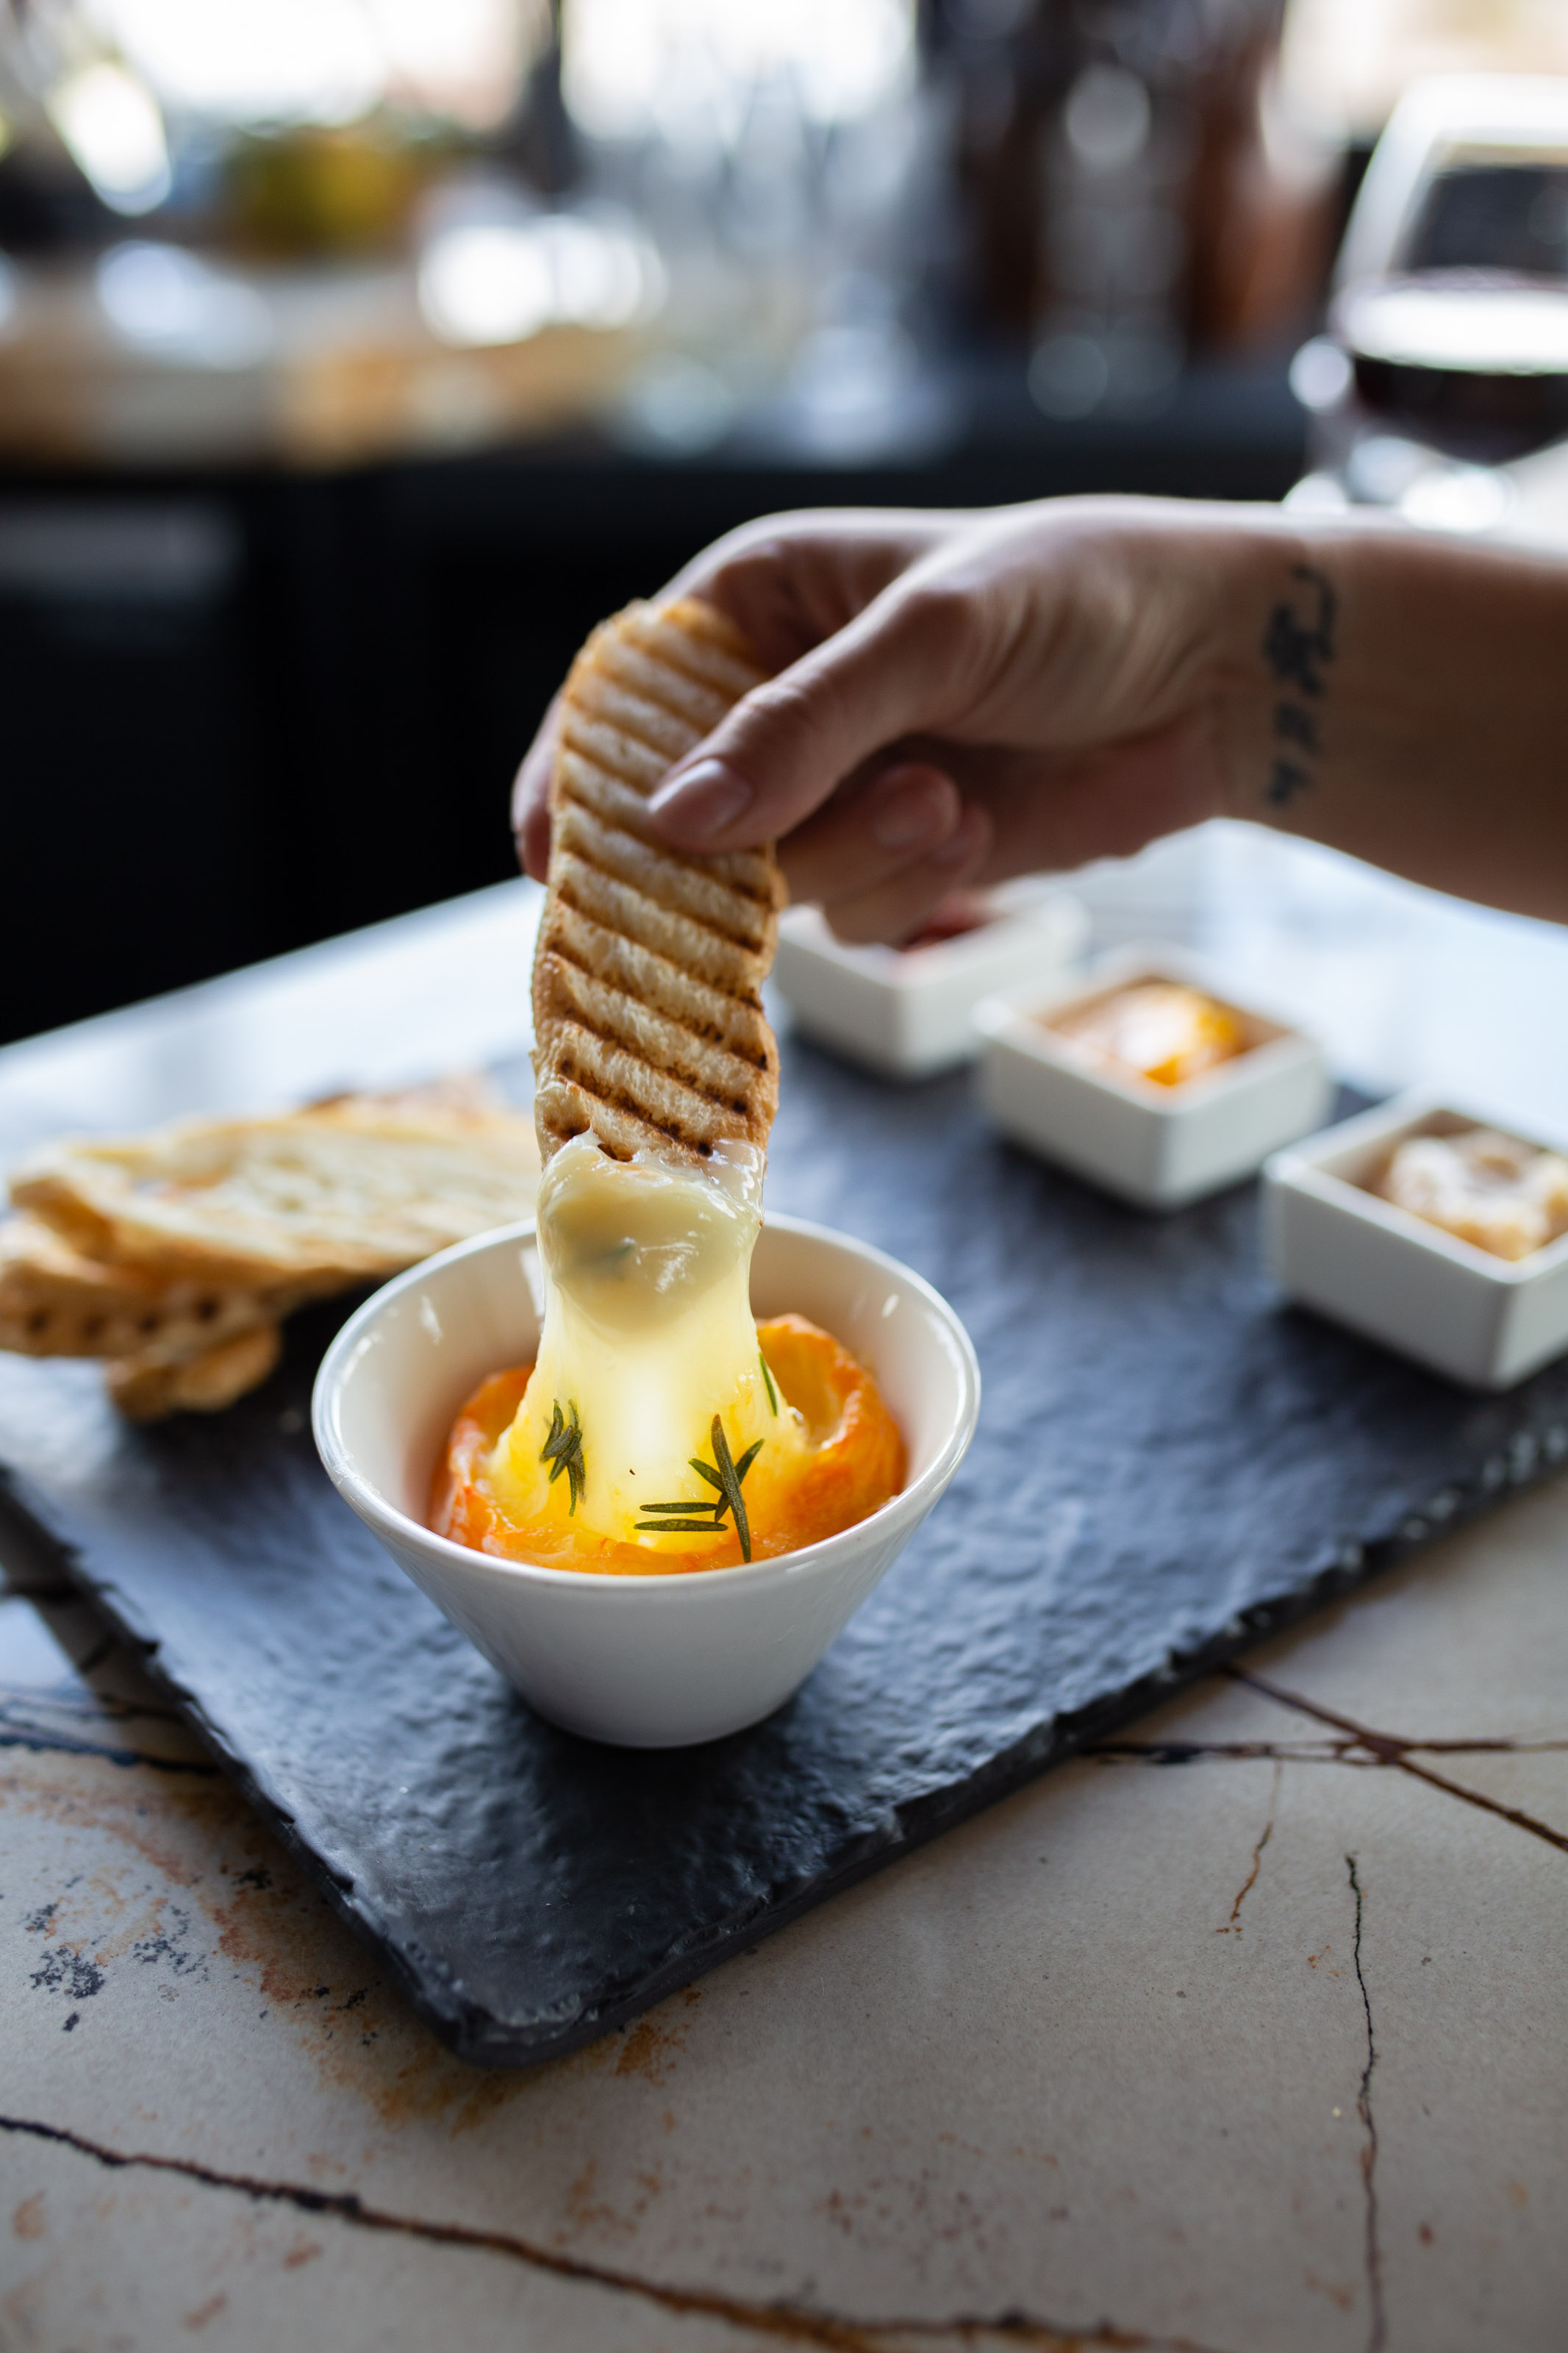 Editorial Photo for Fort Collins Lifestyle Magazine of crusty bread and cheese appetizer at Ginger and Baker restaurant - John Robson Photography